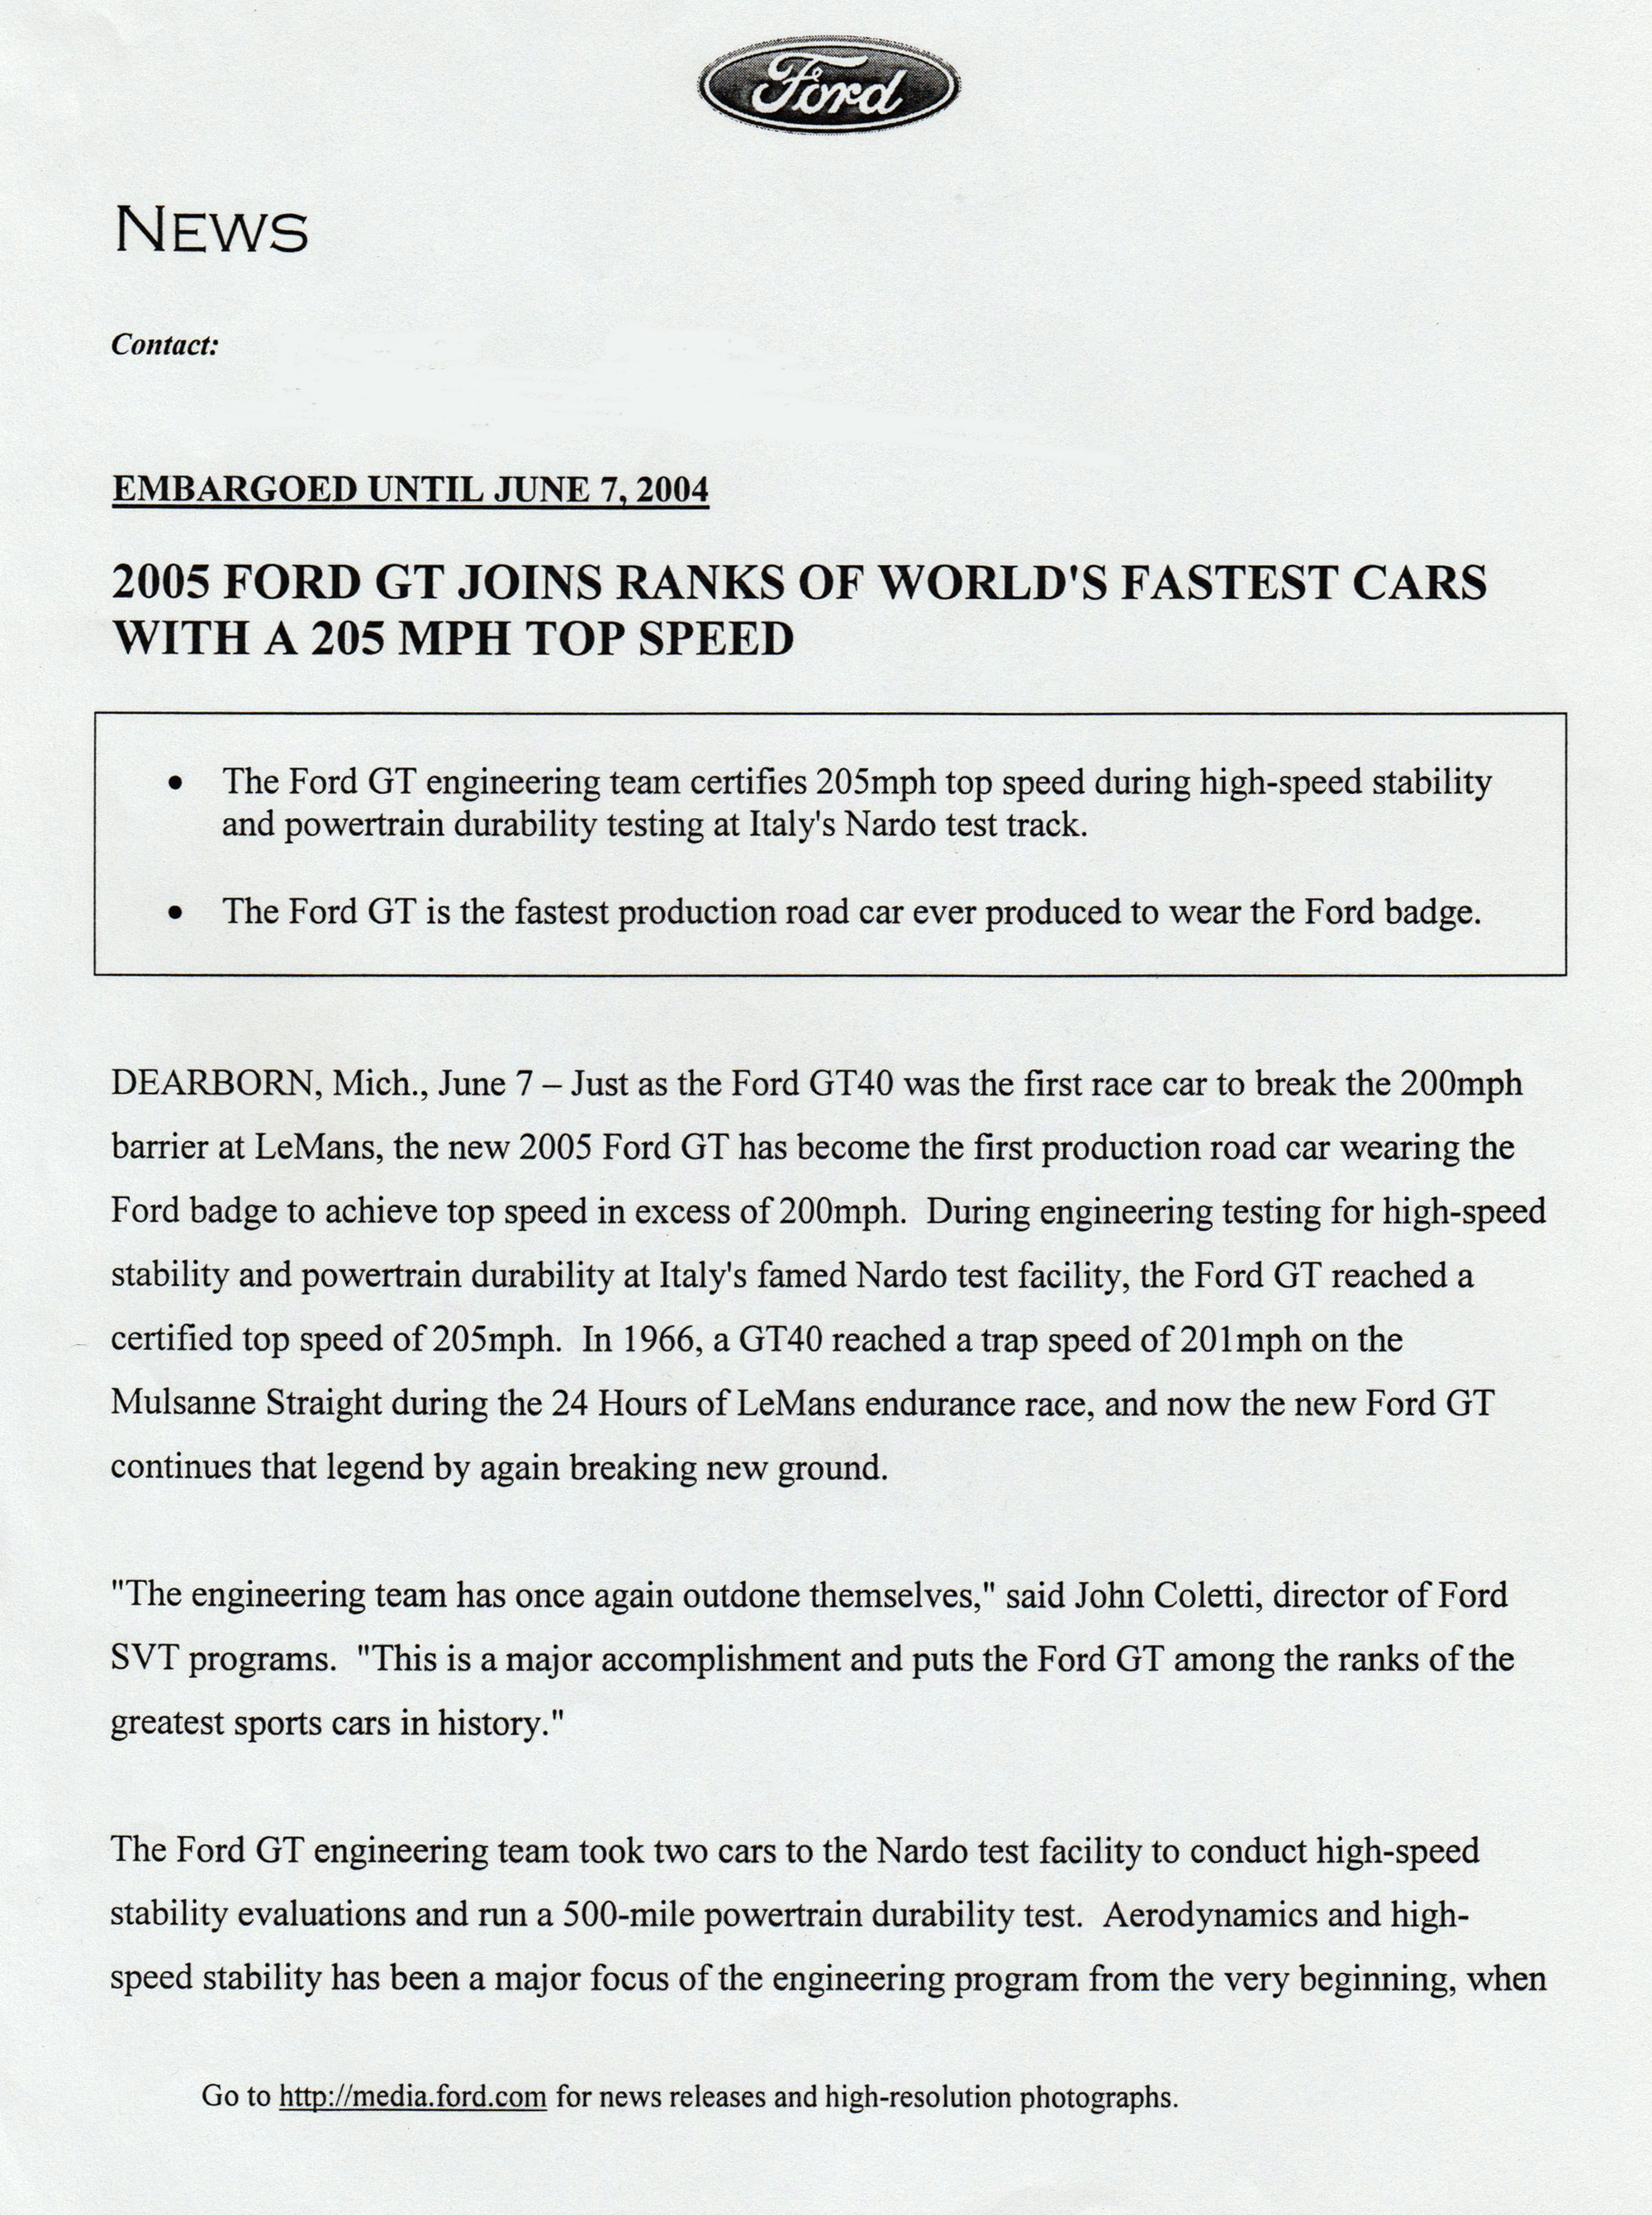 2005 Ford GT Top Speed press release